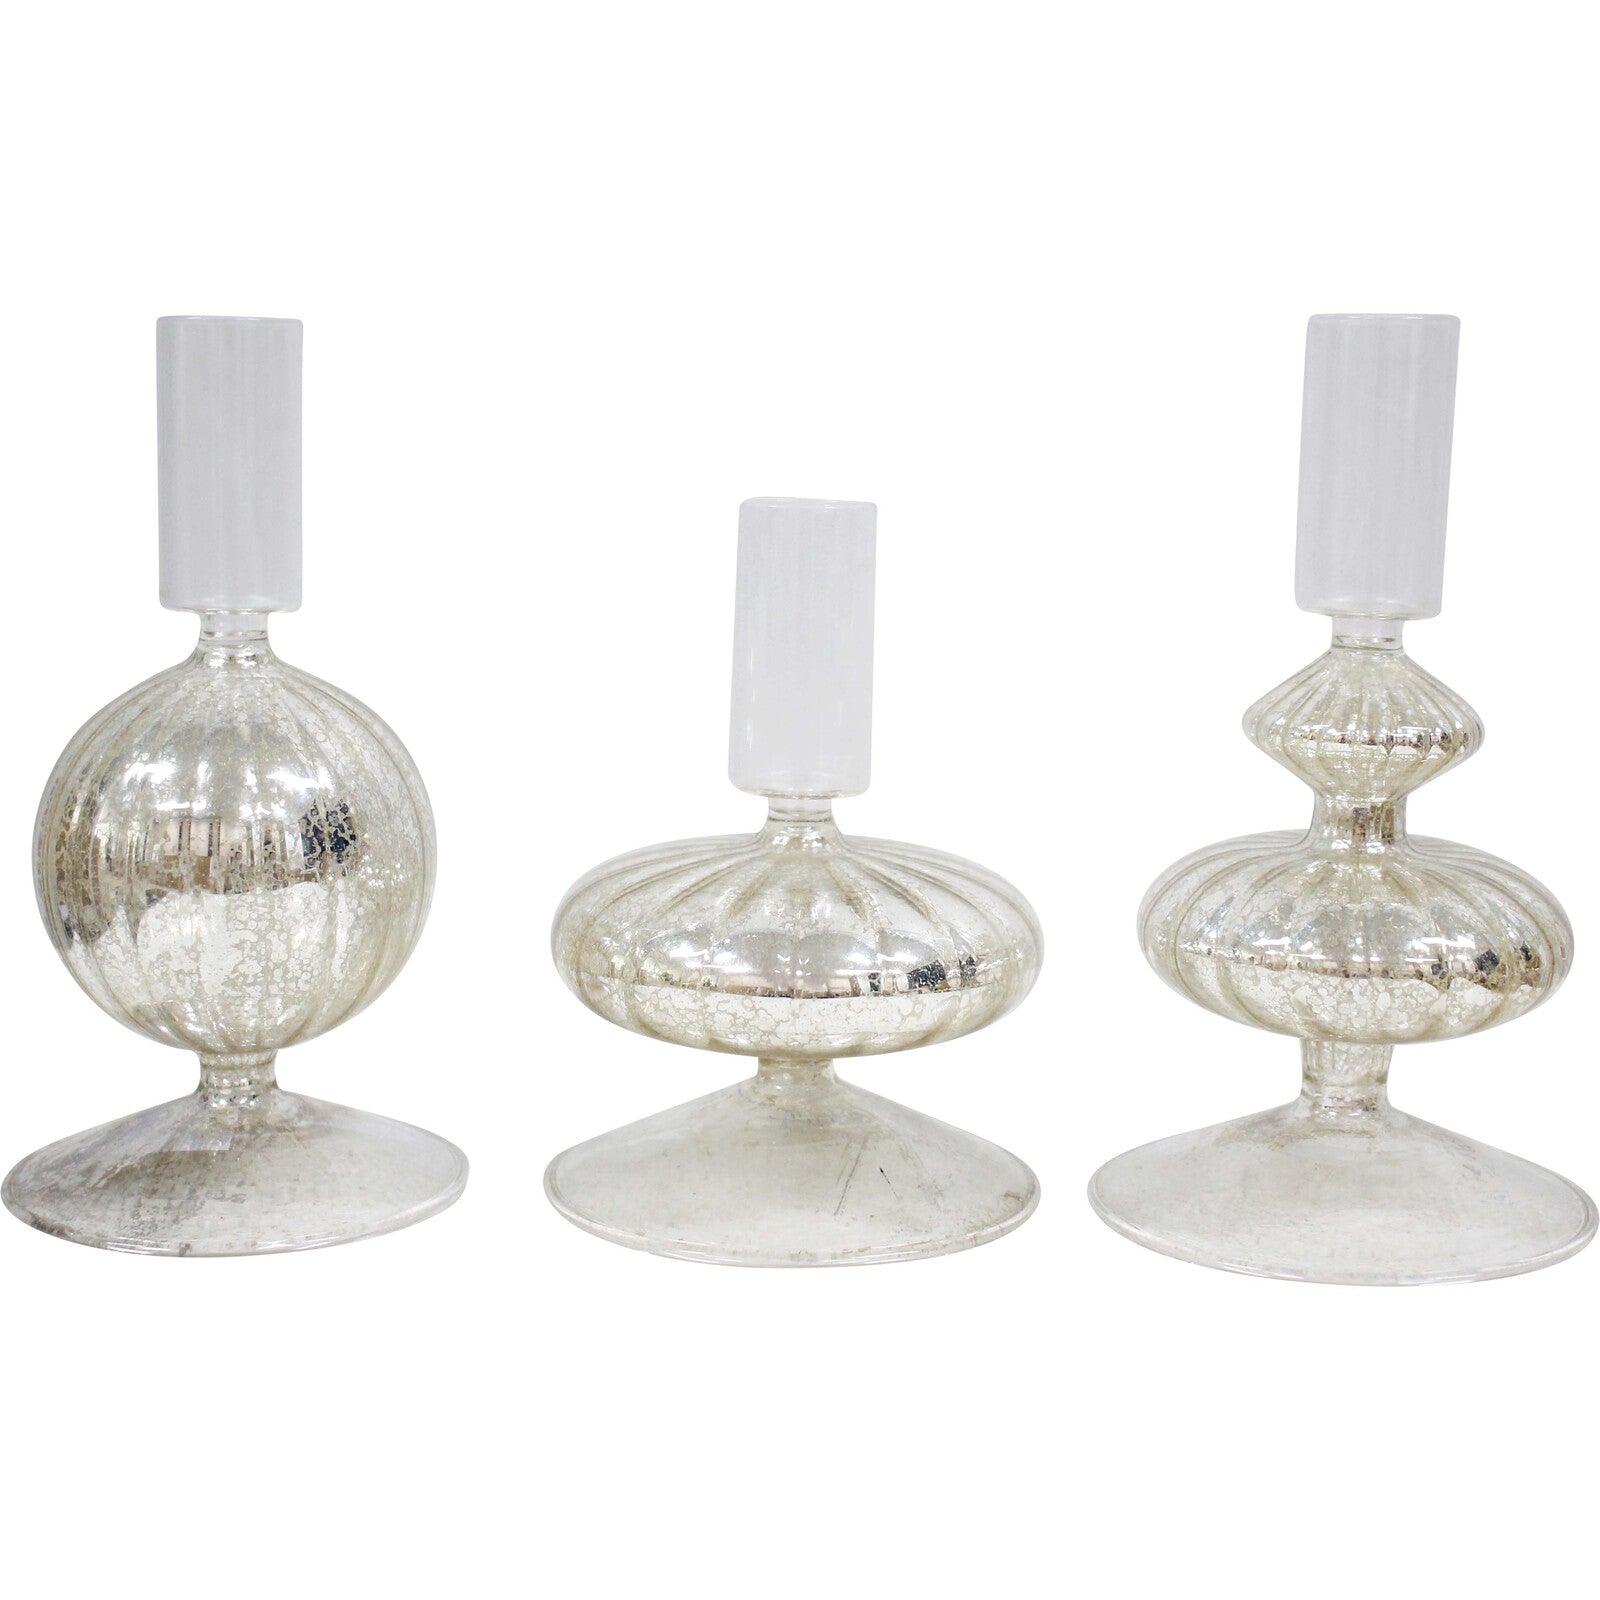 Set of 3 Sparkle Candle Holders